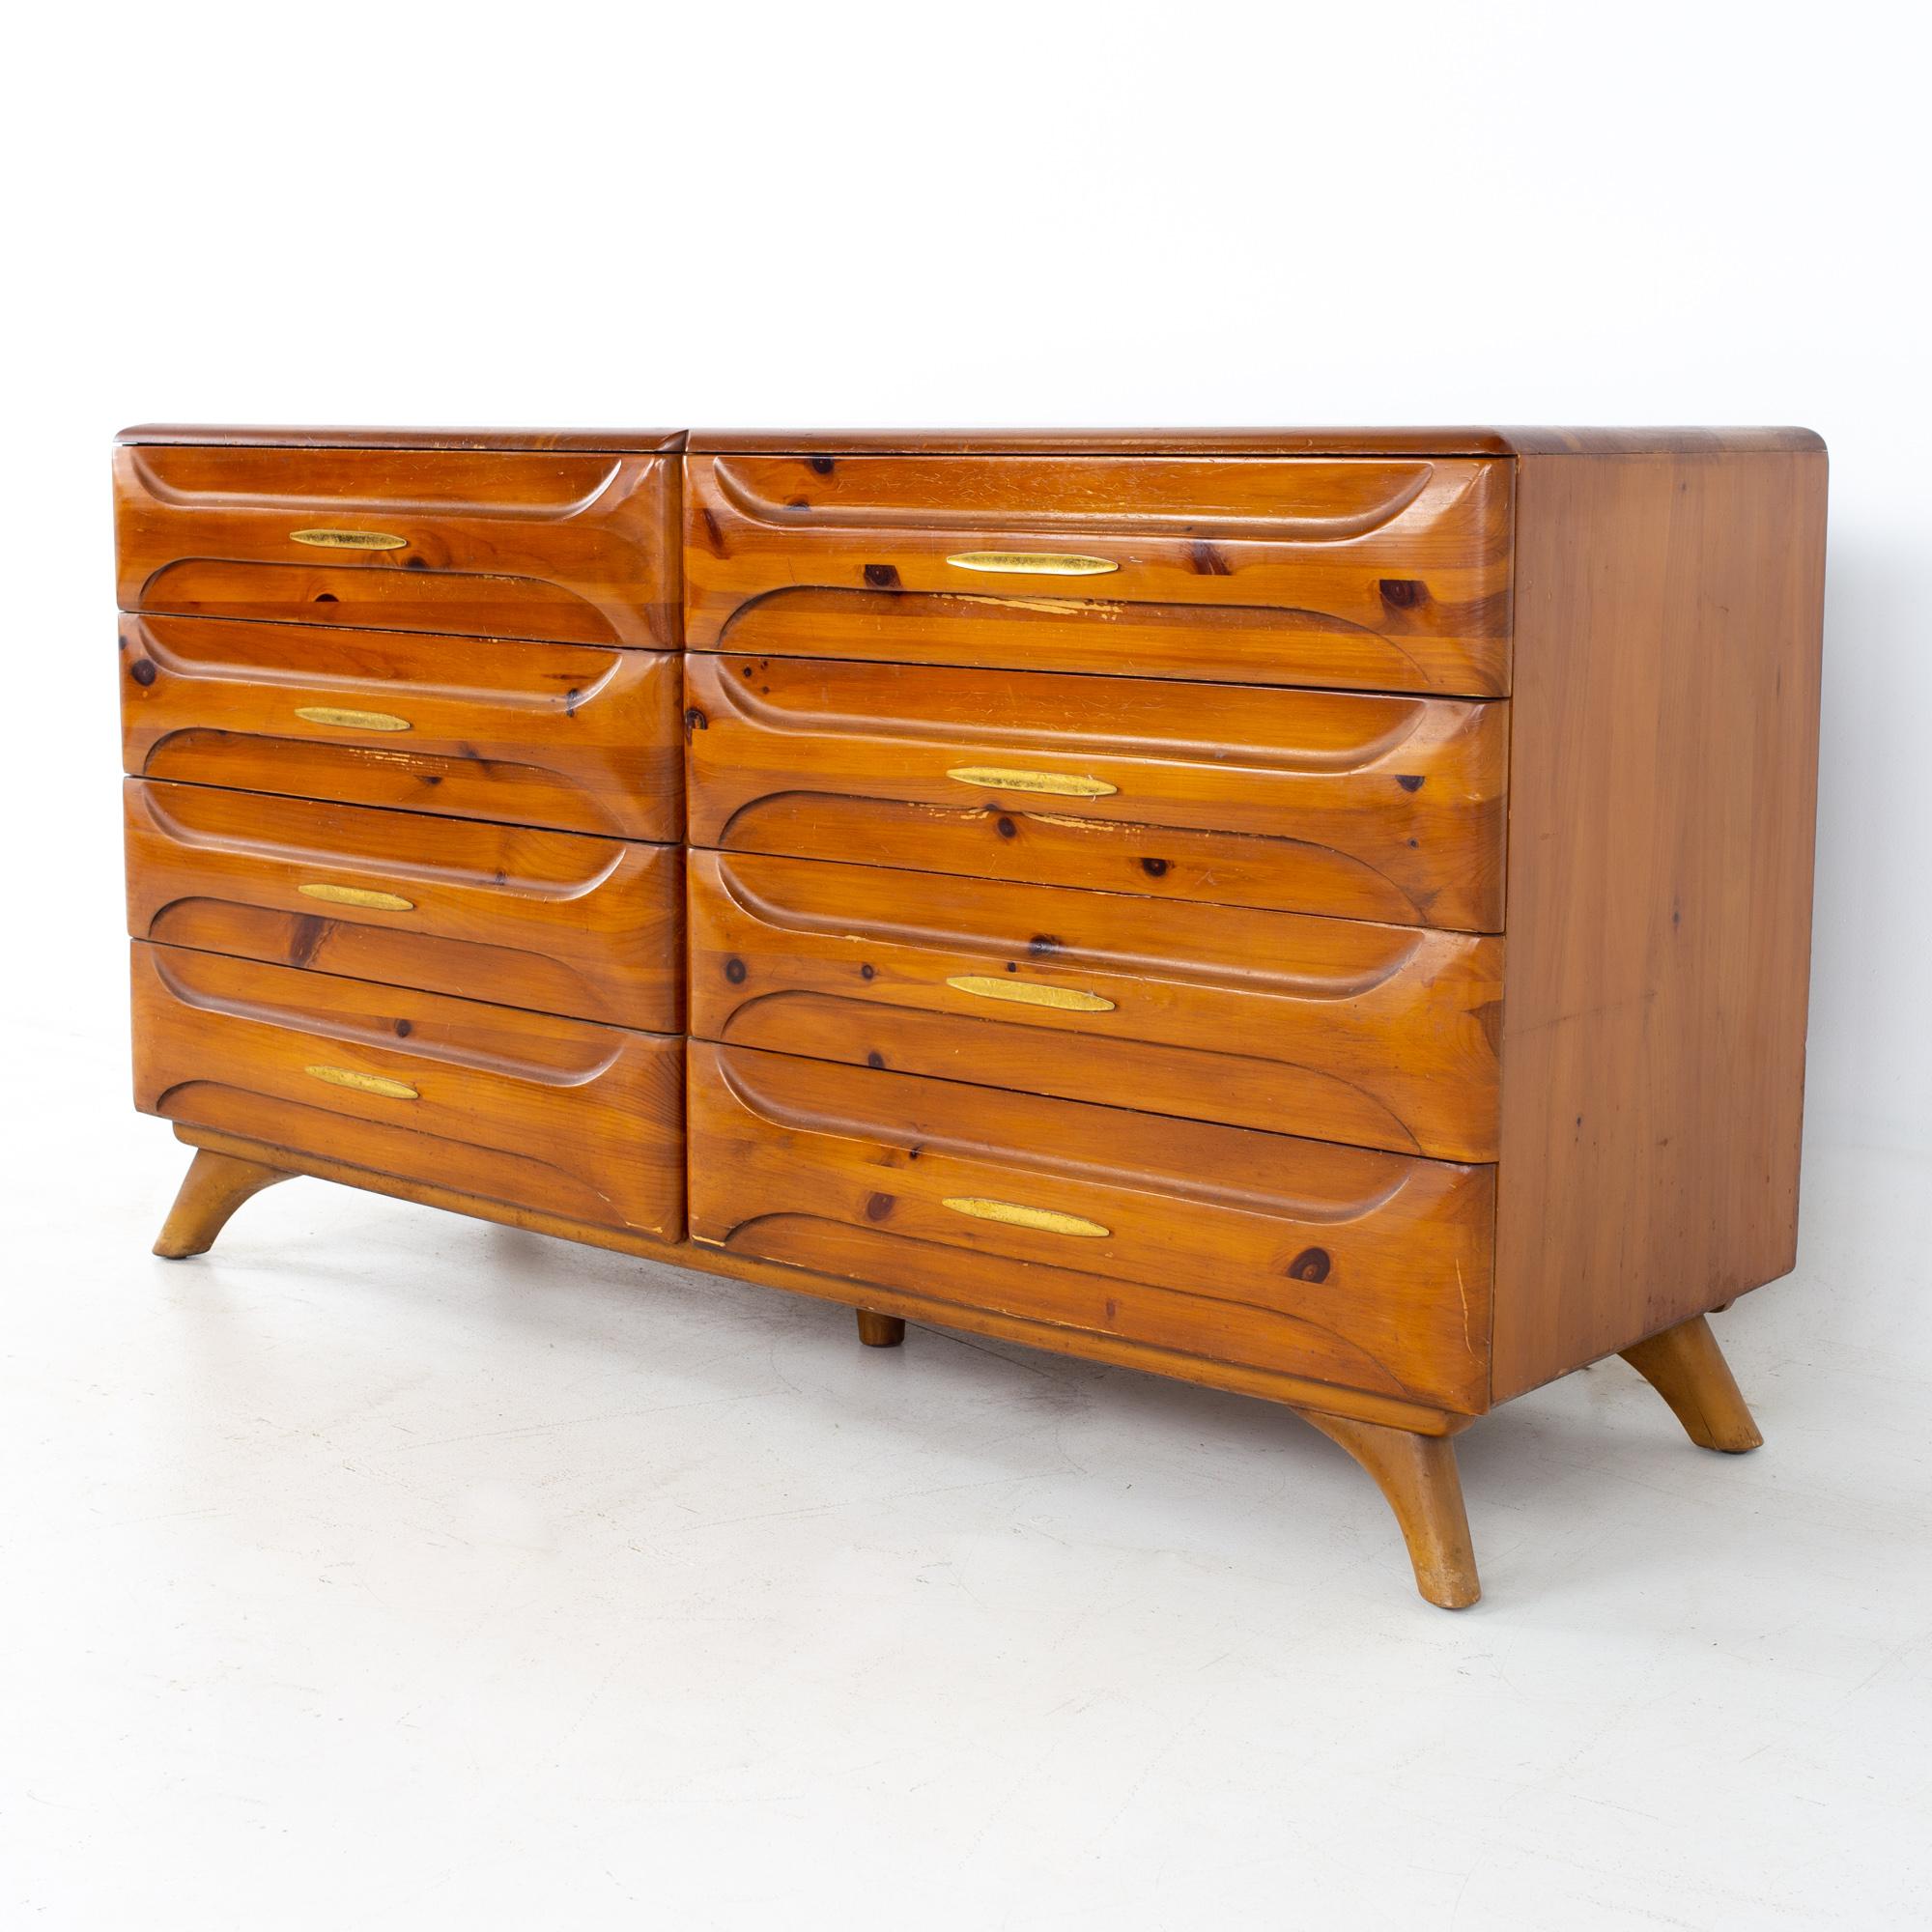 Franklin Shockey mid century 8 drawer lowboy
Lowboy measures: 57 wide x 19.5 deep x 31 inches high

All pieces of furniture can be had in what we call restored vintage condition. That means the piece is restored upon purchase so it’s free of